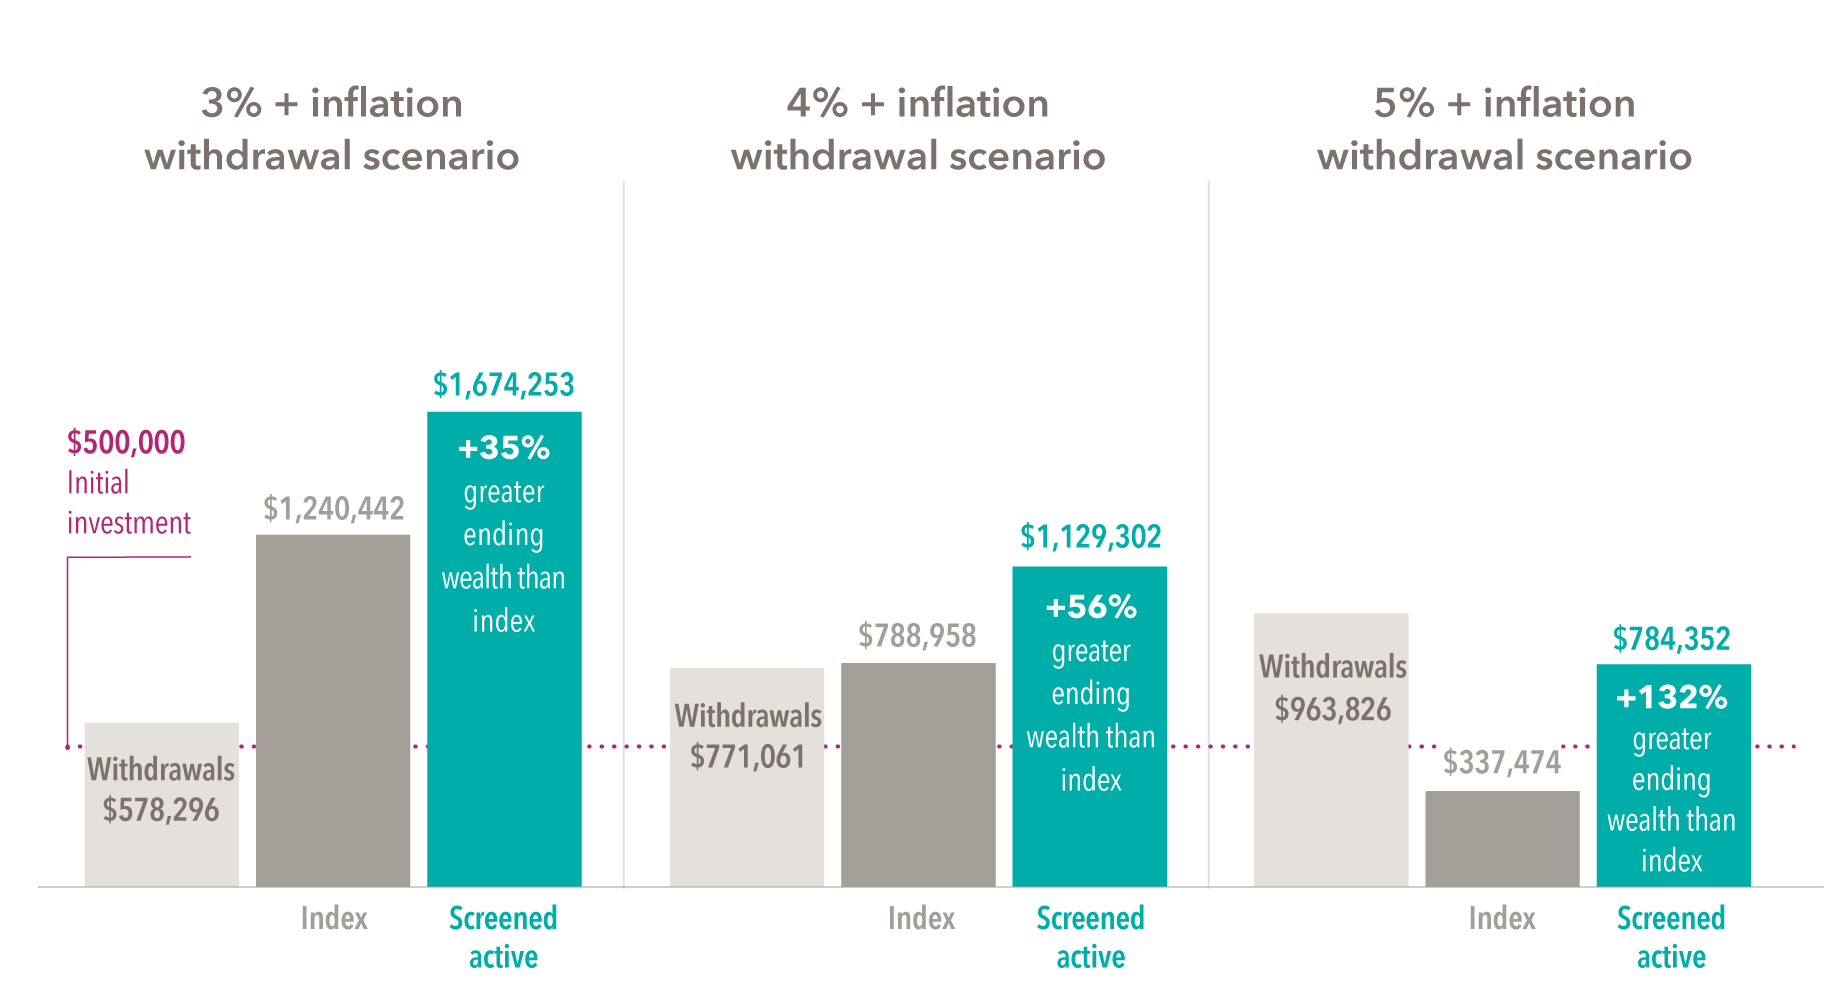 The above depicts three hypothetical withdrawal scenarios over 26 years in retirement, all starting with a $500,000 investment, with withdrawal rates of 3%, 4% and 5%, and with a 3% inflation increase each year. At a 3% initial withdrawal rate, the participant withdrew $578,296 and would have ended up with $1,240,442 if invested in the Index and $1,674,253 if invested in Screened active portfolio, which represents 35% greater wealth than the index. At a 4% initial withdrawal rate, the participant withdrew $771,061 and would have ended up with $788,958 if invested in the Index and $1,129,302 if invested in Screened active portfolio, which represents 56% greater wealth than the index. At a 5% initial withdrawal rate, the participant withdrew $963,826 and would have ended up with $333,474 if invested in the Index and $784,352 if invested in Screened active portfolio, which represents 132% greater wealth than the index.